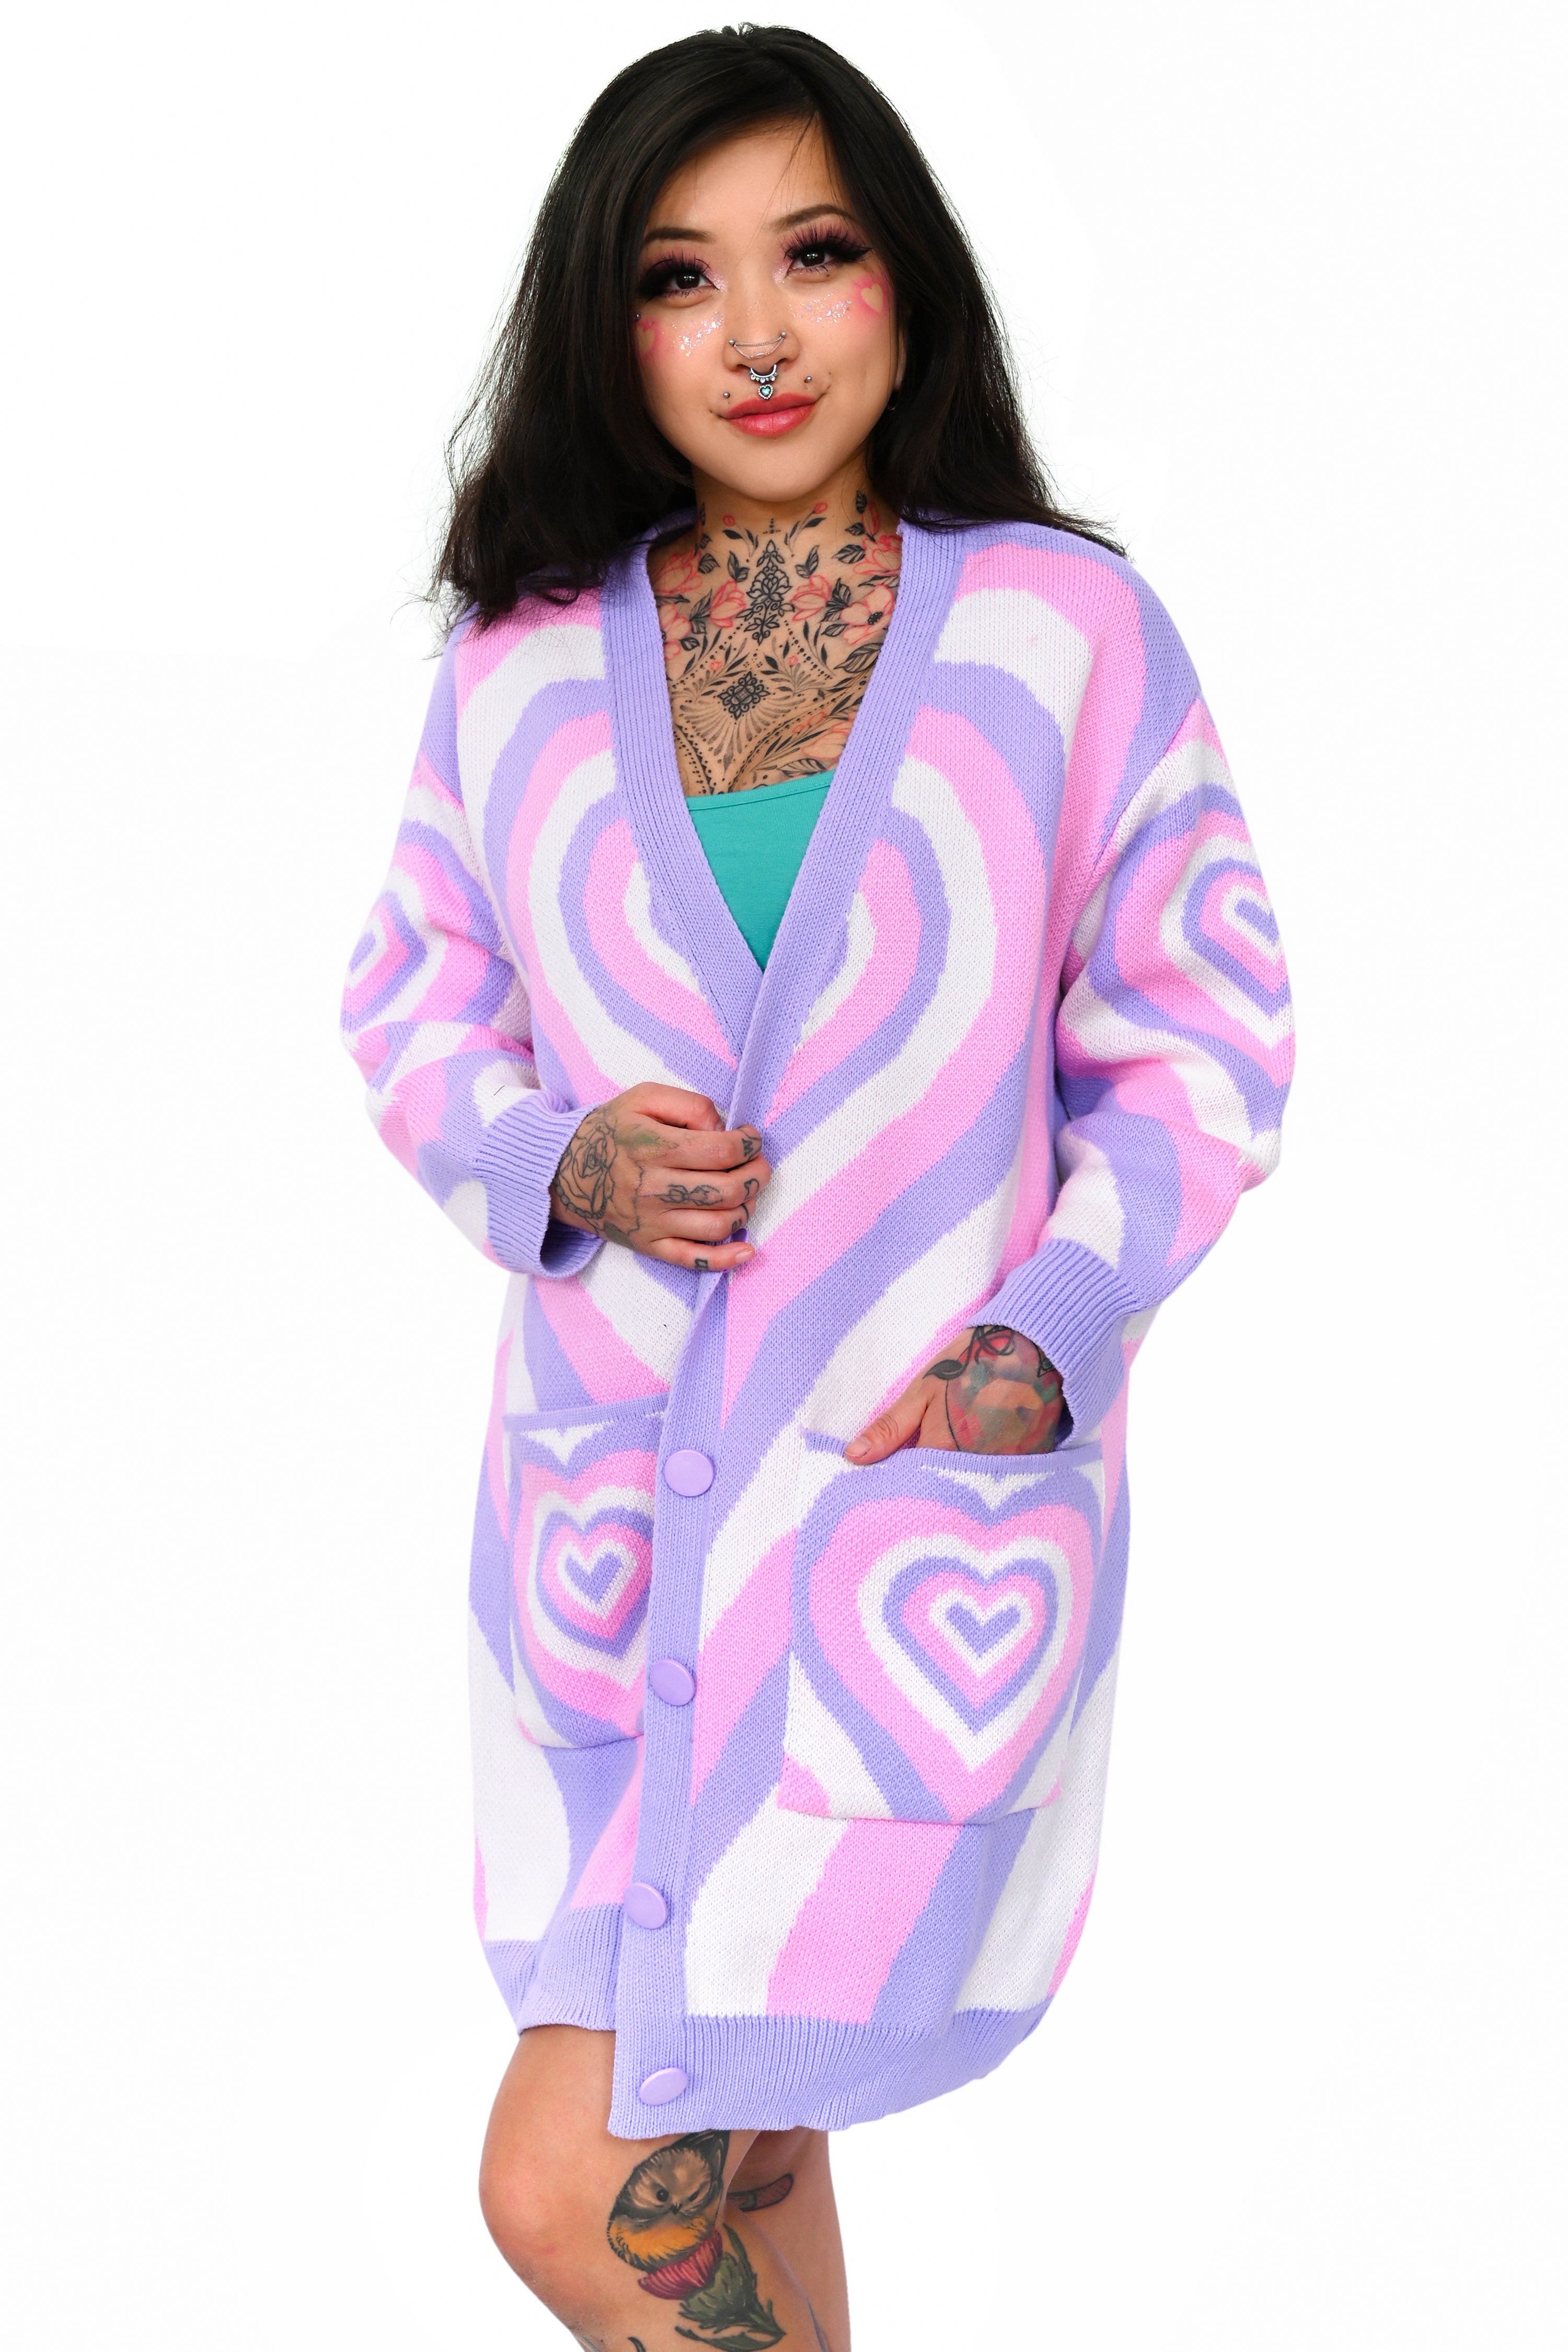 slouchy oversized statement sweater in Lavender, White, and purple with hearts all over shown on a standing XS model